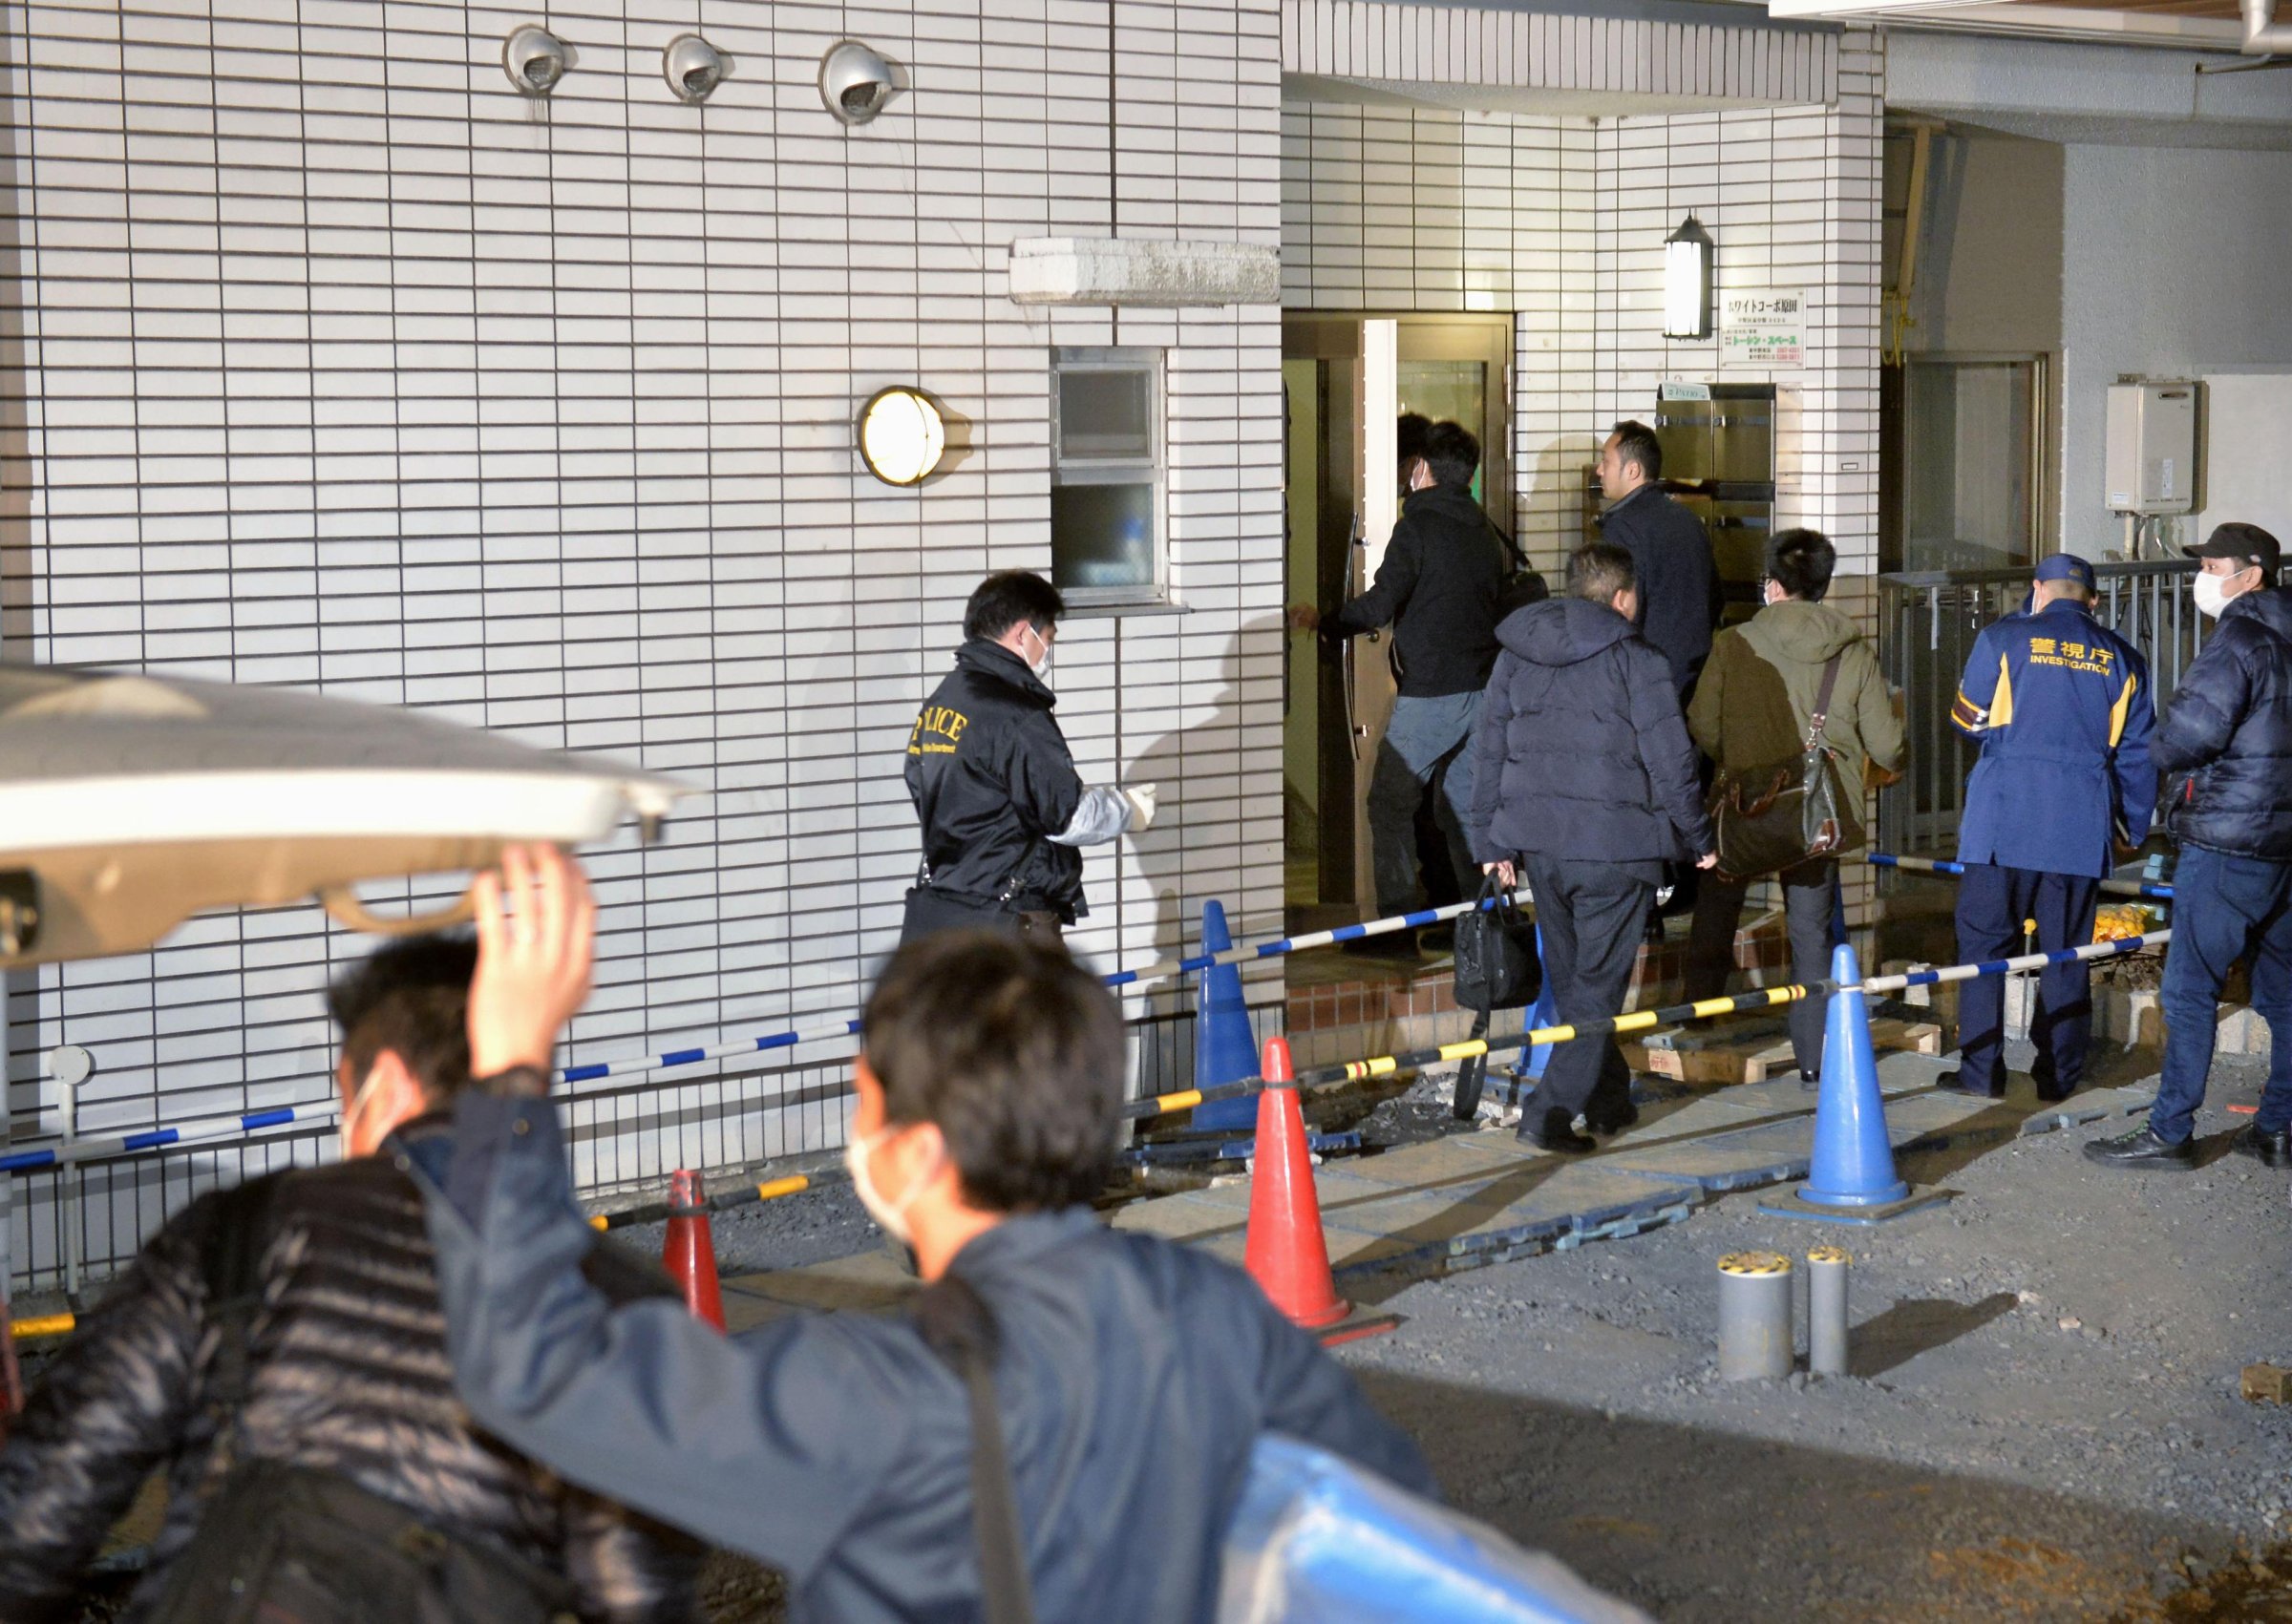 Police officers arrive for investigation of the apartment of abduction suspect Kabu Terauchi in Tokyo on March 28, 2016.